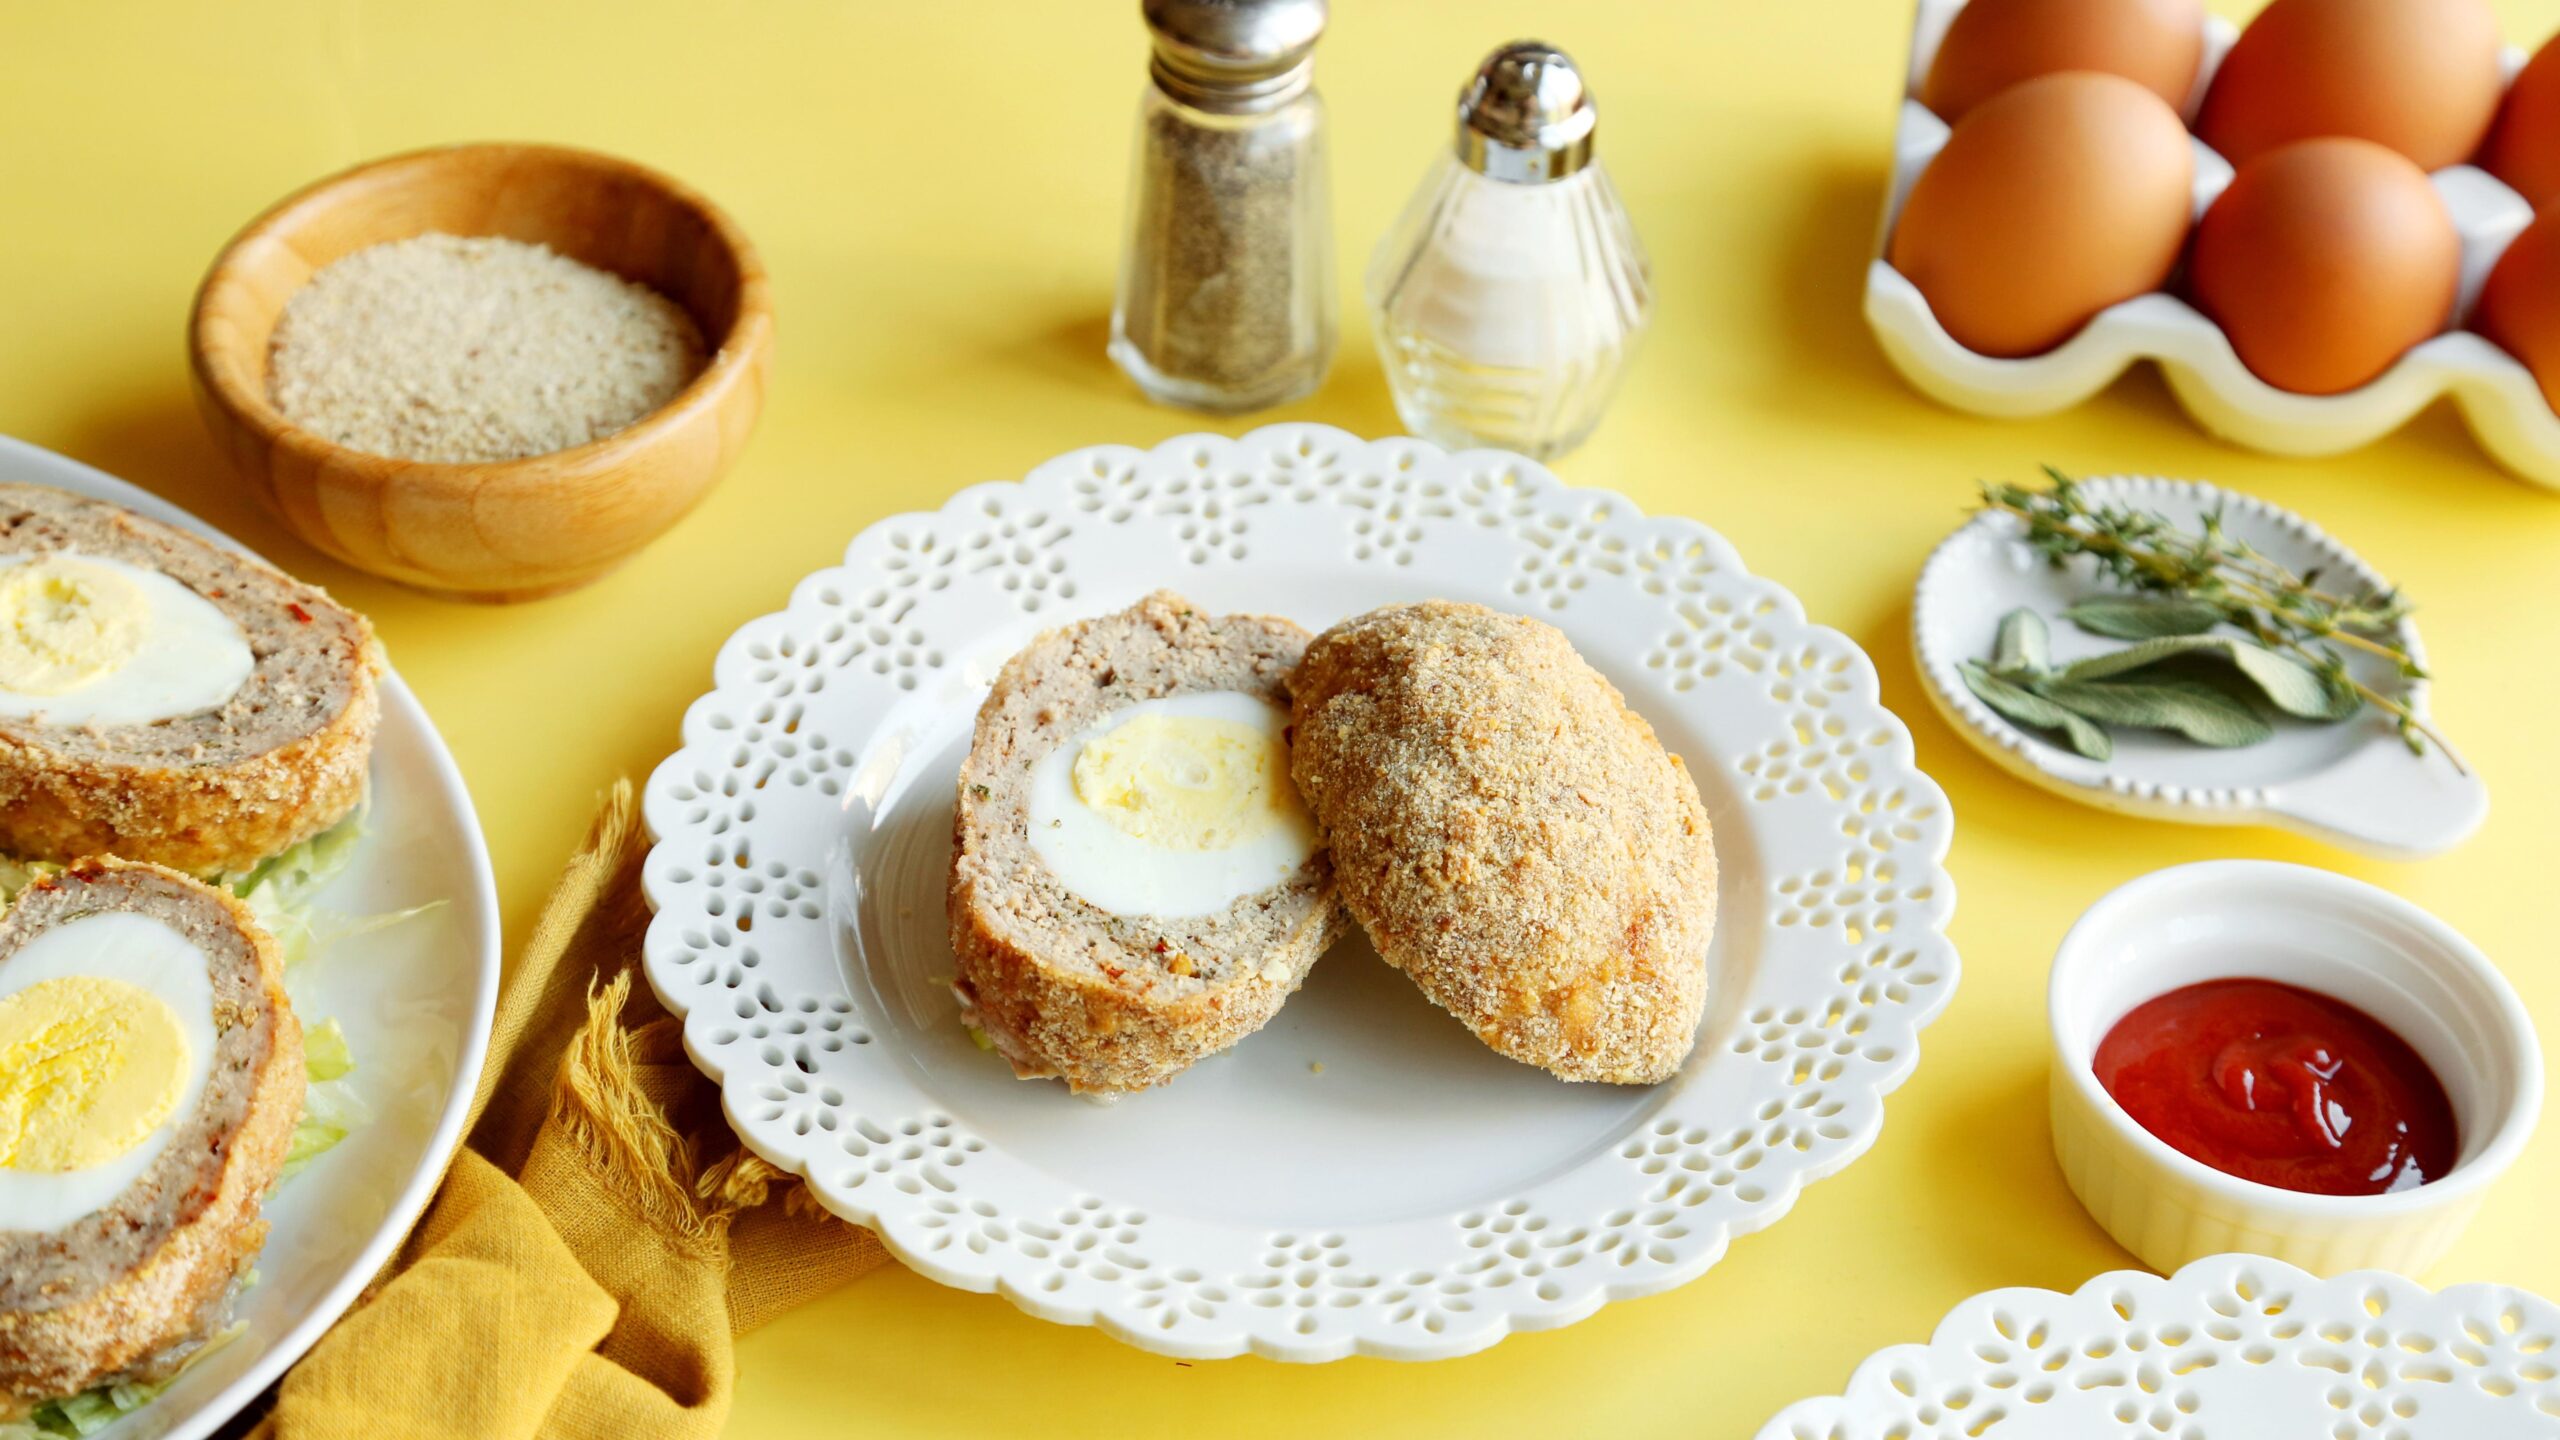 Delicious Baked Scotch Eggs Recipe – Perfect for Brunch!